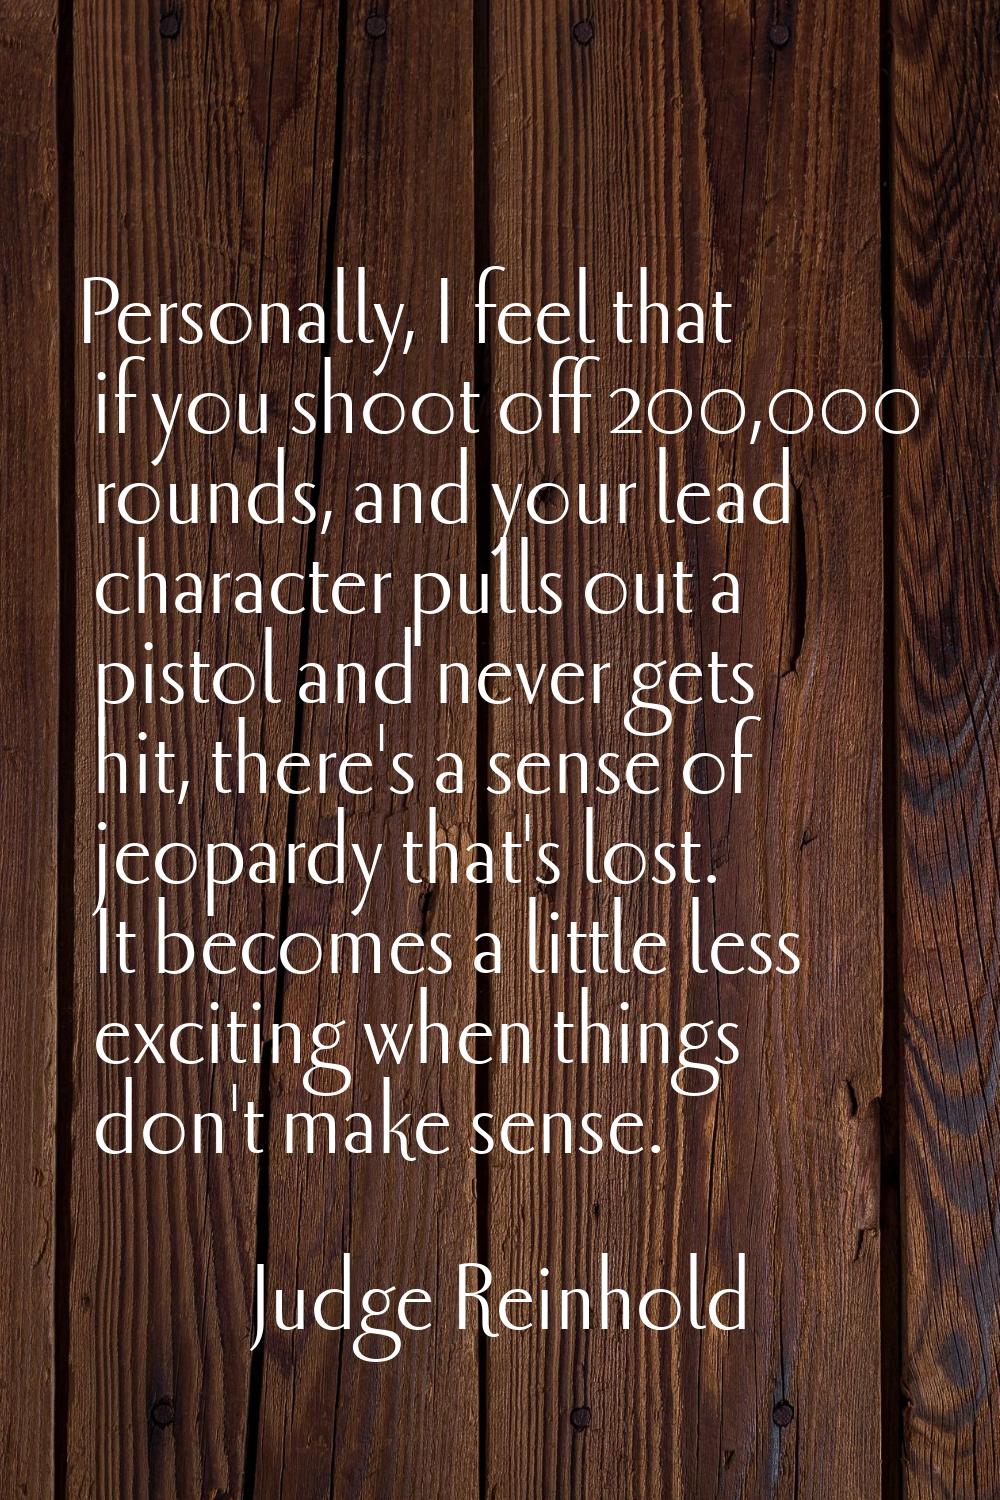 Personally, I feel that if you shoot off 200,000 rounds, and your lead character pulls out a pistol